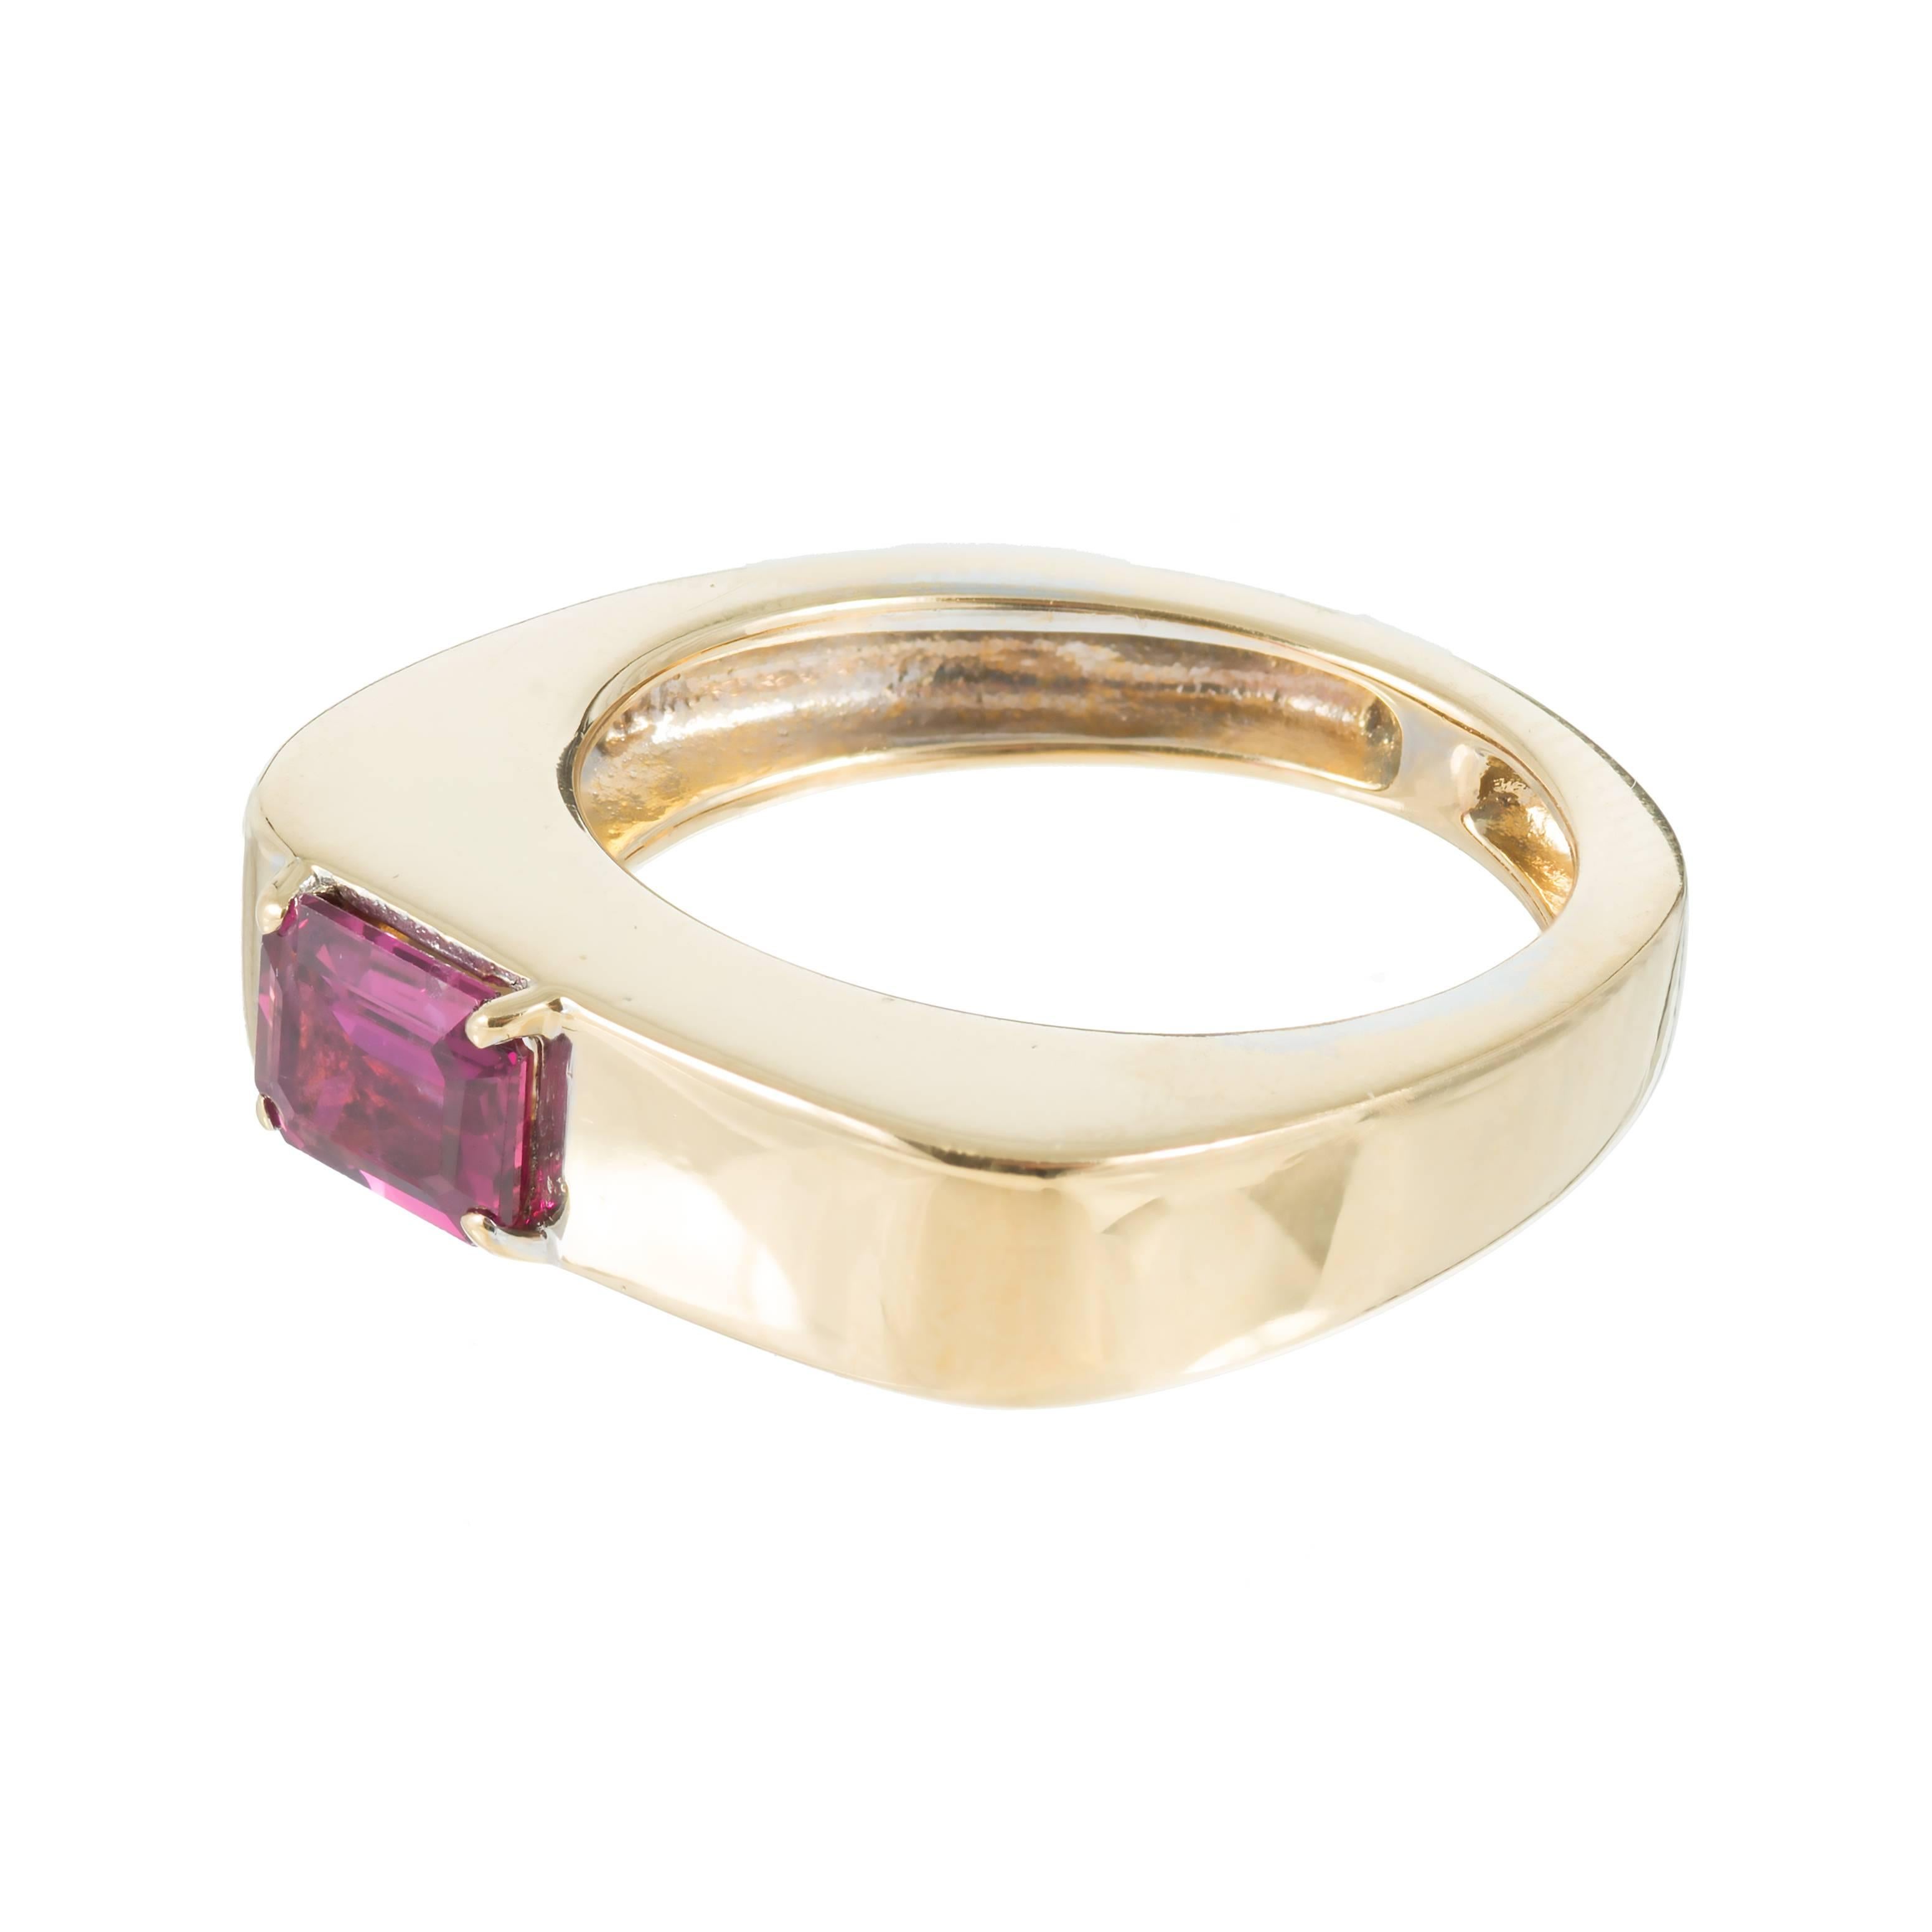 Solid 18k yellow gold ring with a bright red genuine Ruby 0.70ct. 

1 Emerald cut bright red Ruby, approx. total weight .70cts, SI1, 6.28 x 4.76 x 2.05mm
Size 6.25 and sizable
18k yellow gold
Tested and stamped: 18k
8.3 grams
Width at top: